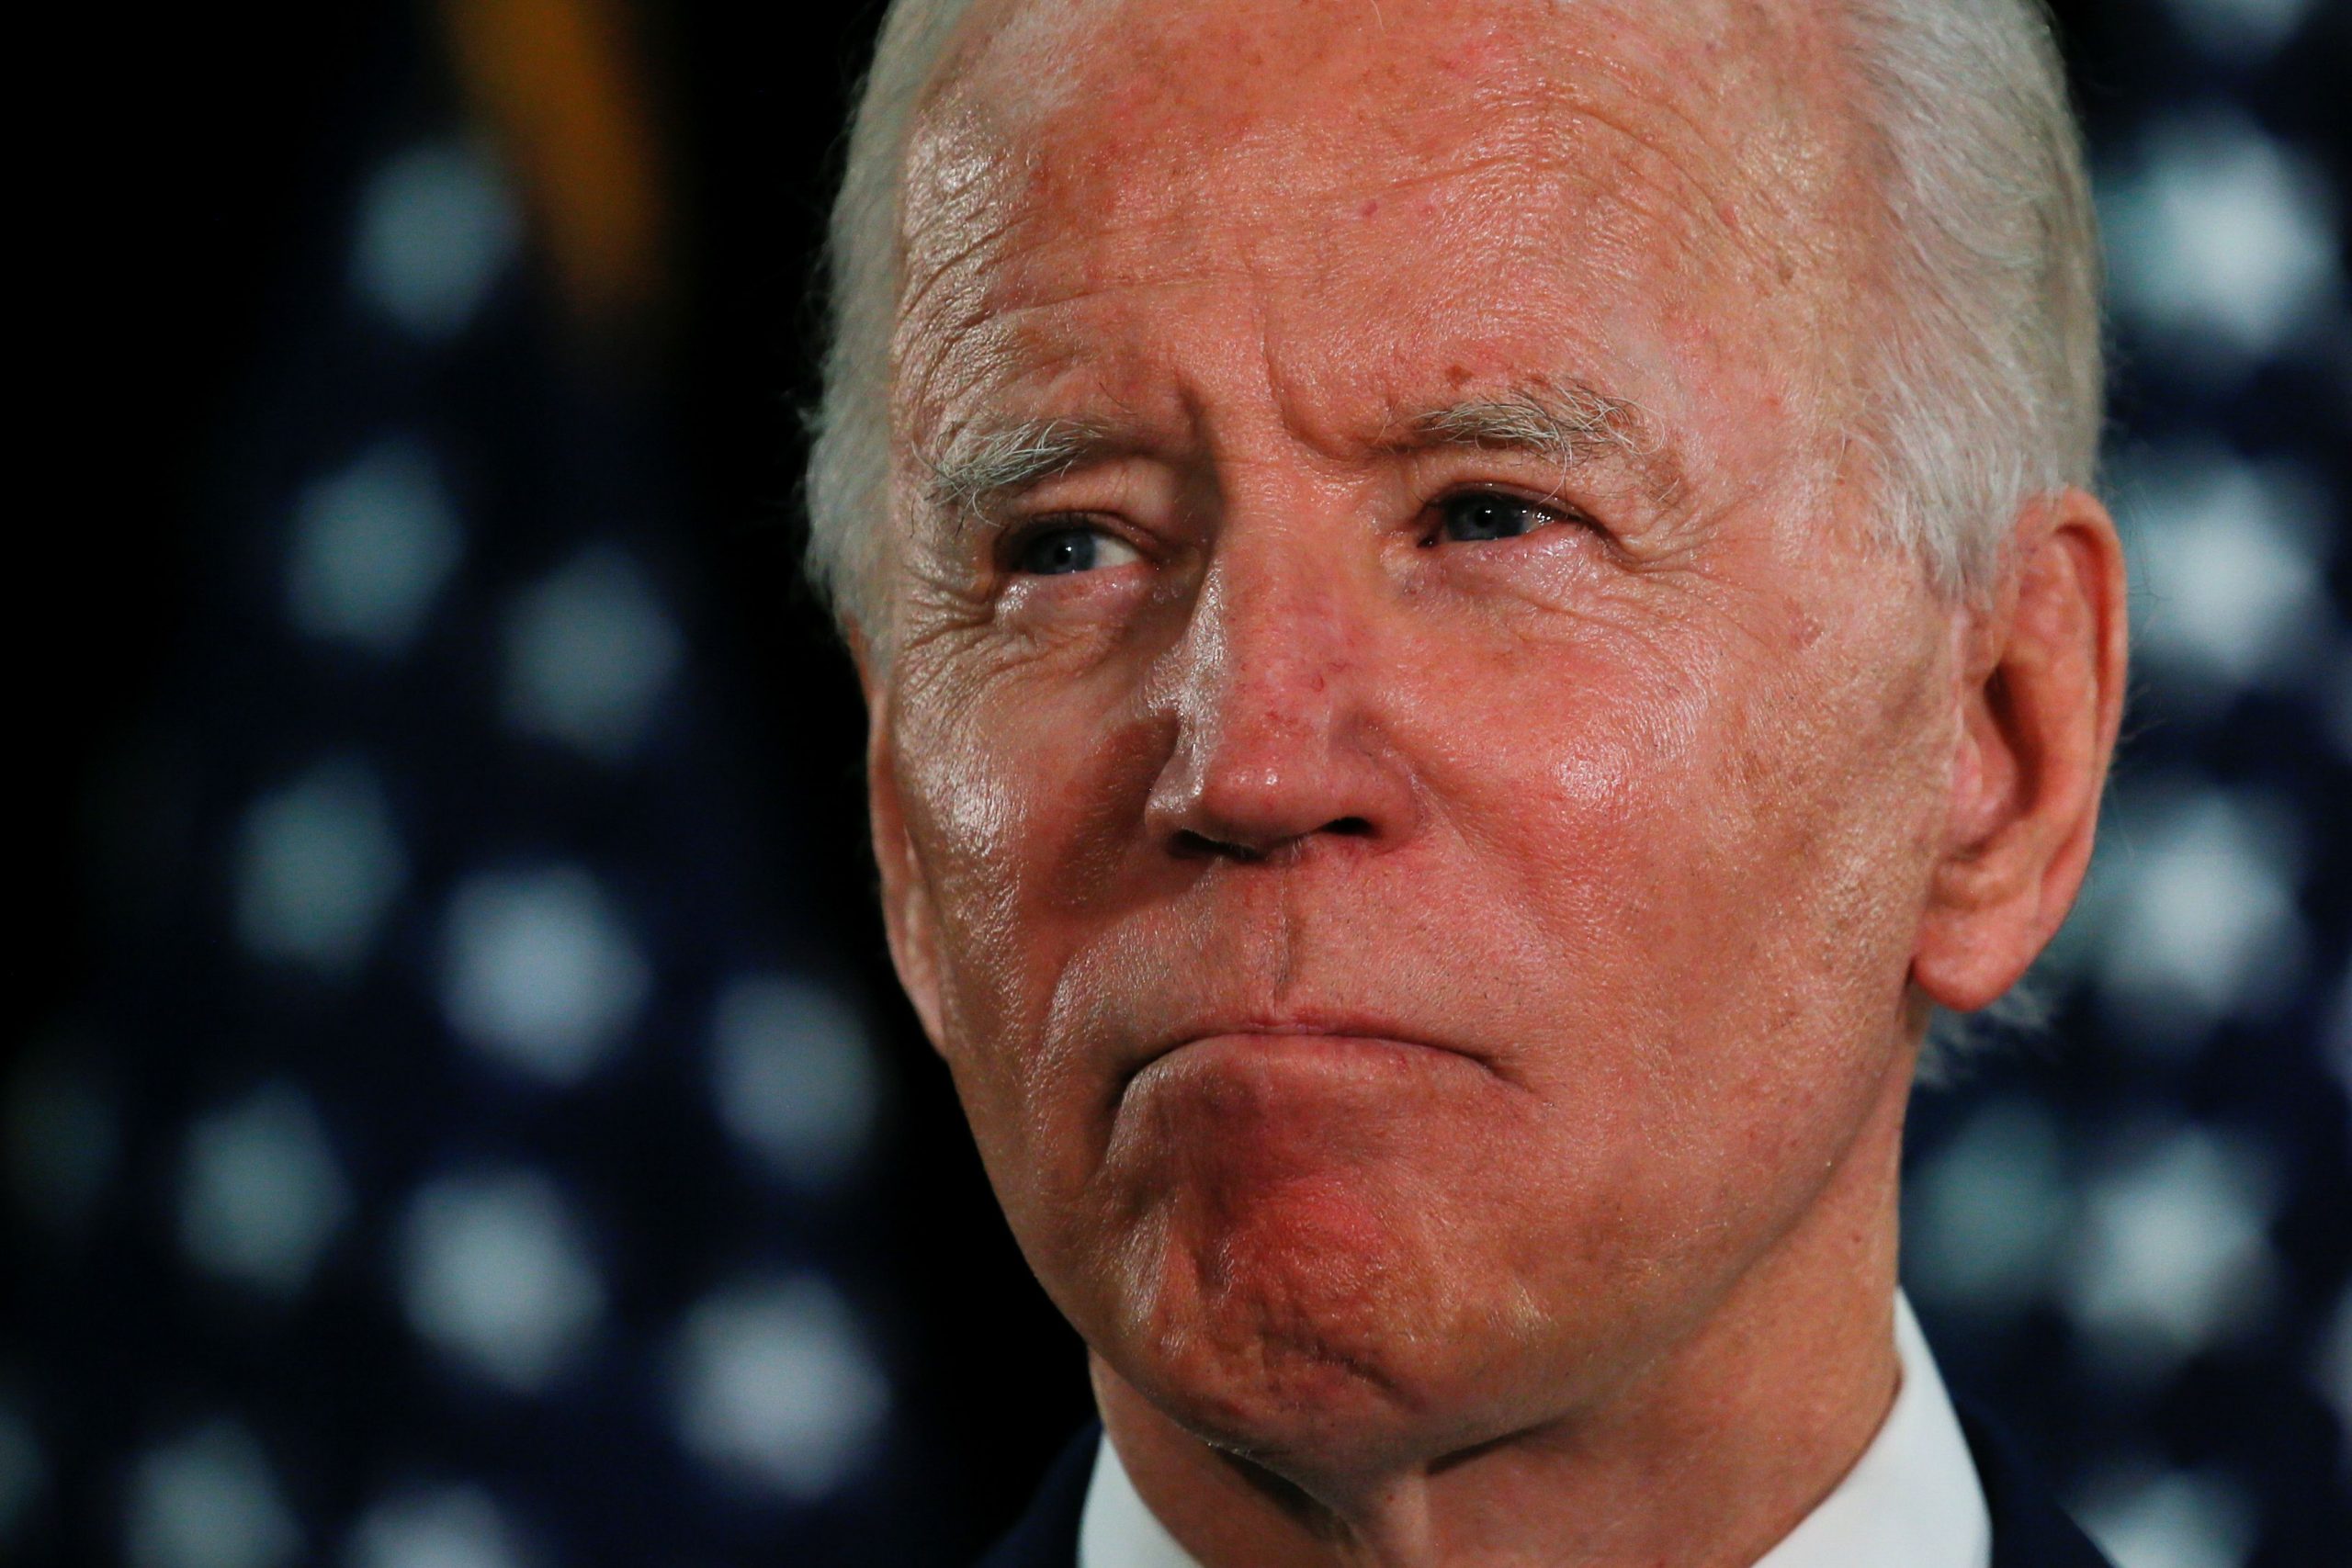 Biden faces impossible budget math even with big tax hikes